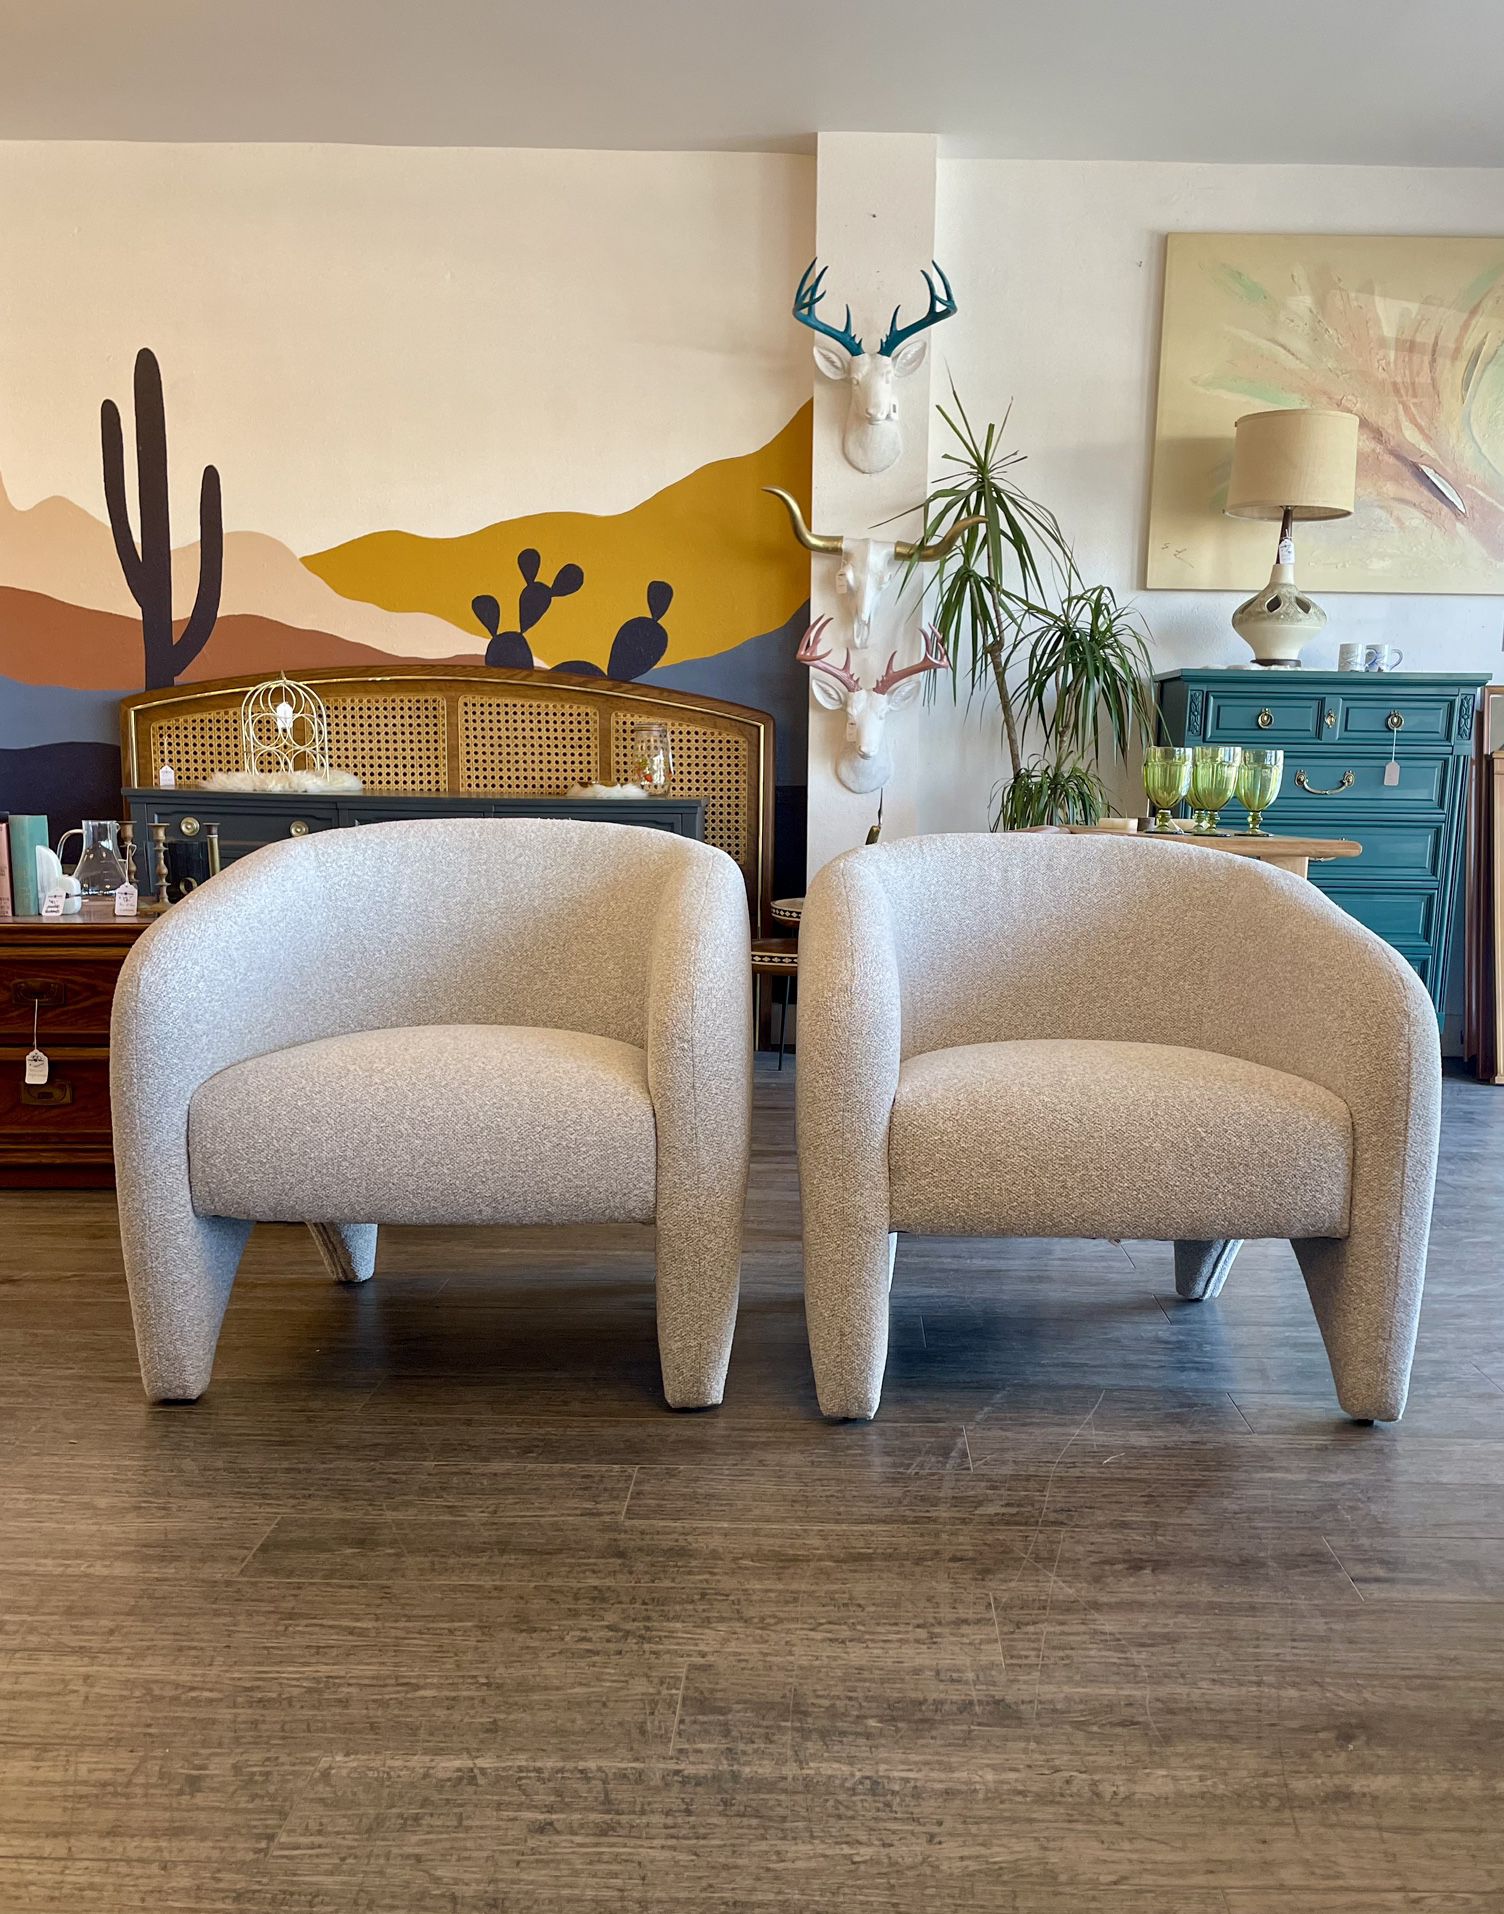 NEW Gray Accent Chairs - $575 Each